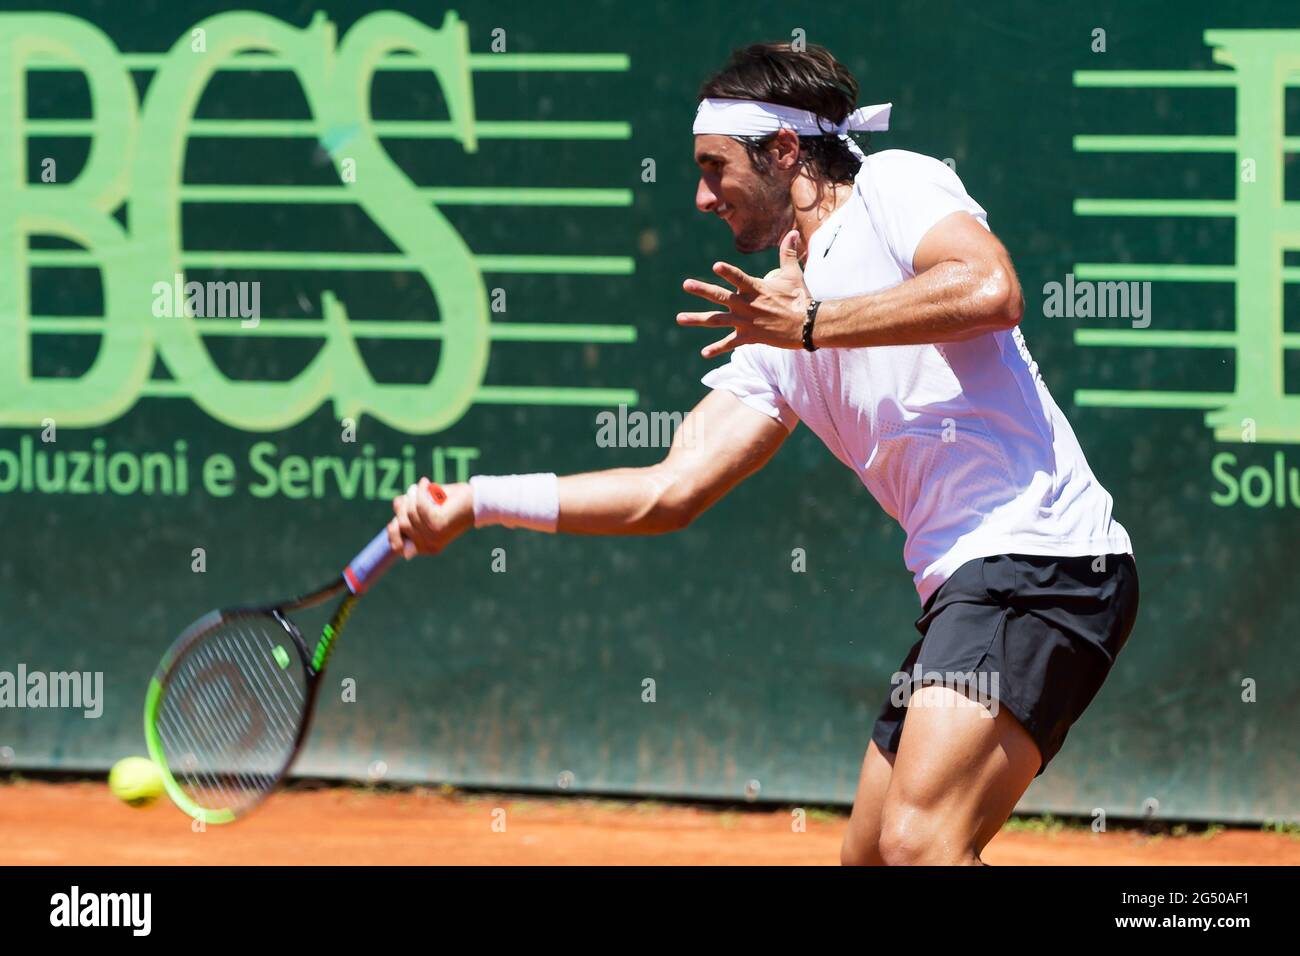 Milan, Italy. 24th June, 2021. MORONI Gian Marco Italian player during ATP  Challenger Milano 2021, Tennis Internationals in Milan, Italy, June 24 2021  Credit: Independent Photo Agency/Alamy Live News Stock Photo - Alamy